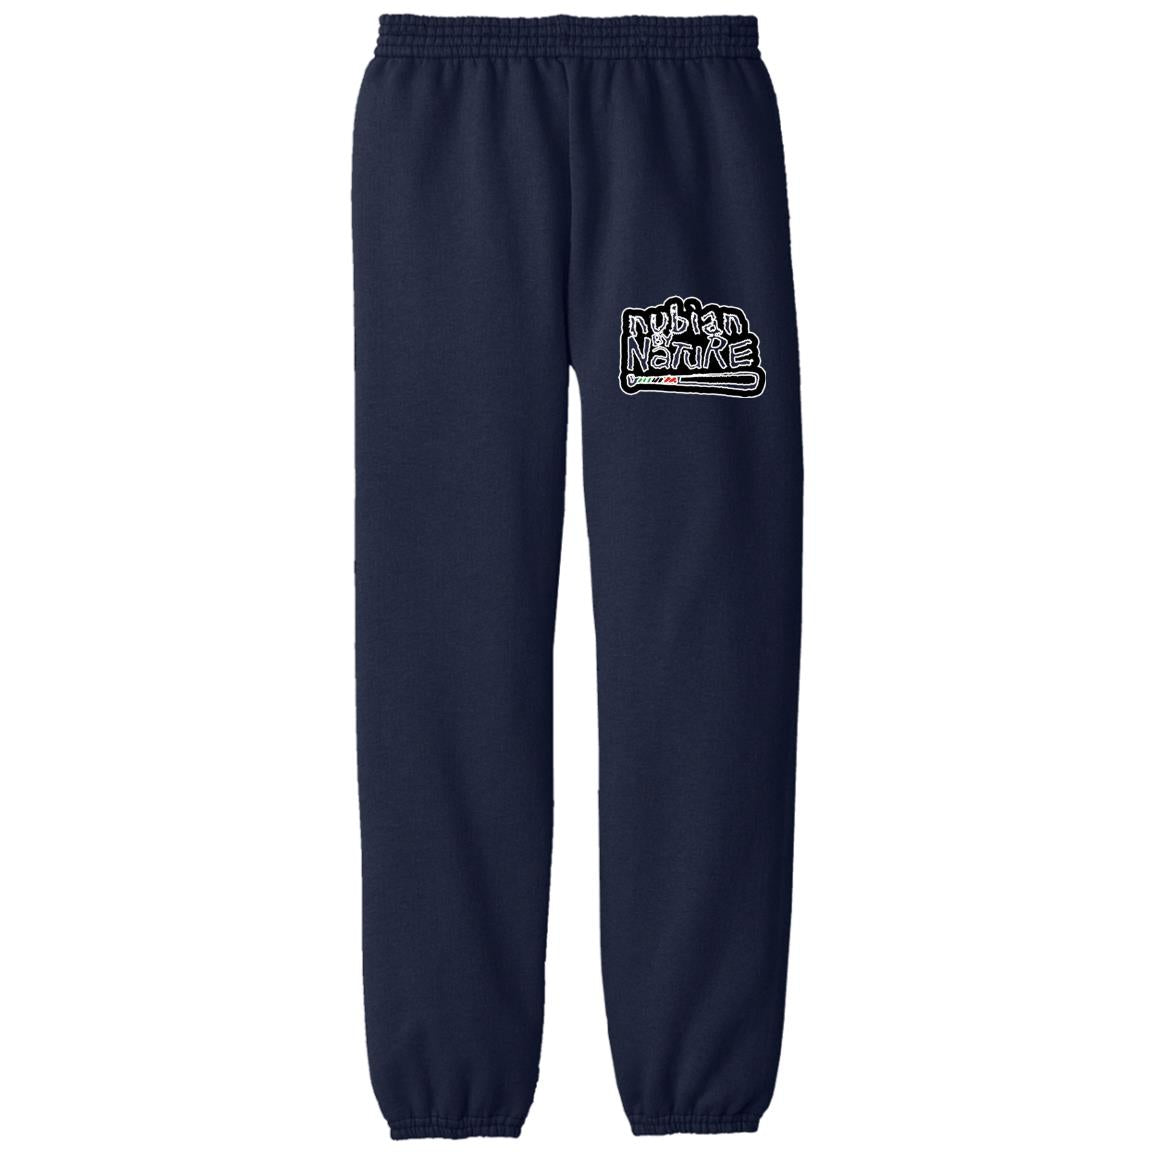 Nubian By Nature Youth Fleece Pants